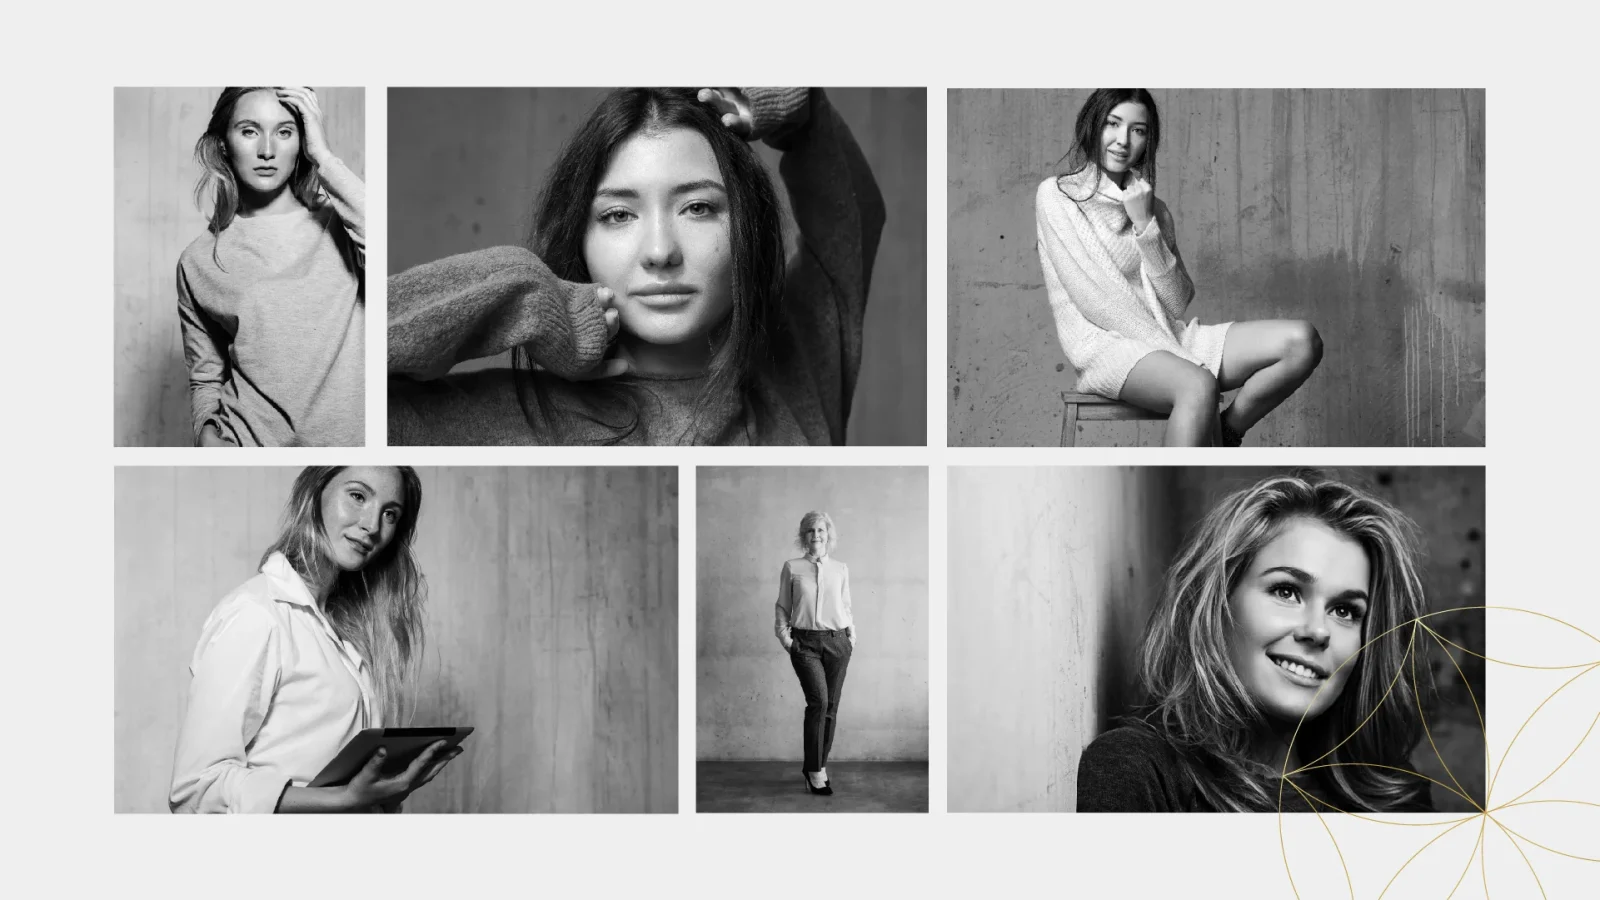 A collage of six monochrome portraits of different women, showcasing a variety of expressions and poses against plain backgrounds, interspersed with abstract golden line art by a design agency in Wales.